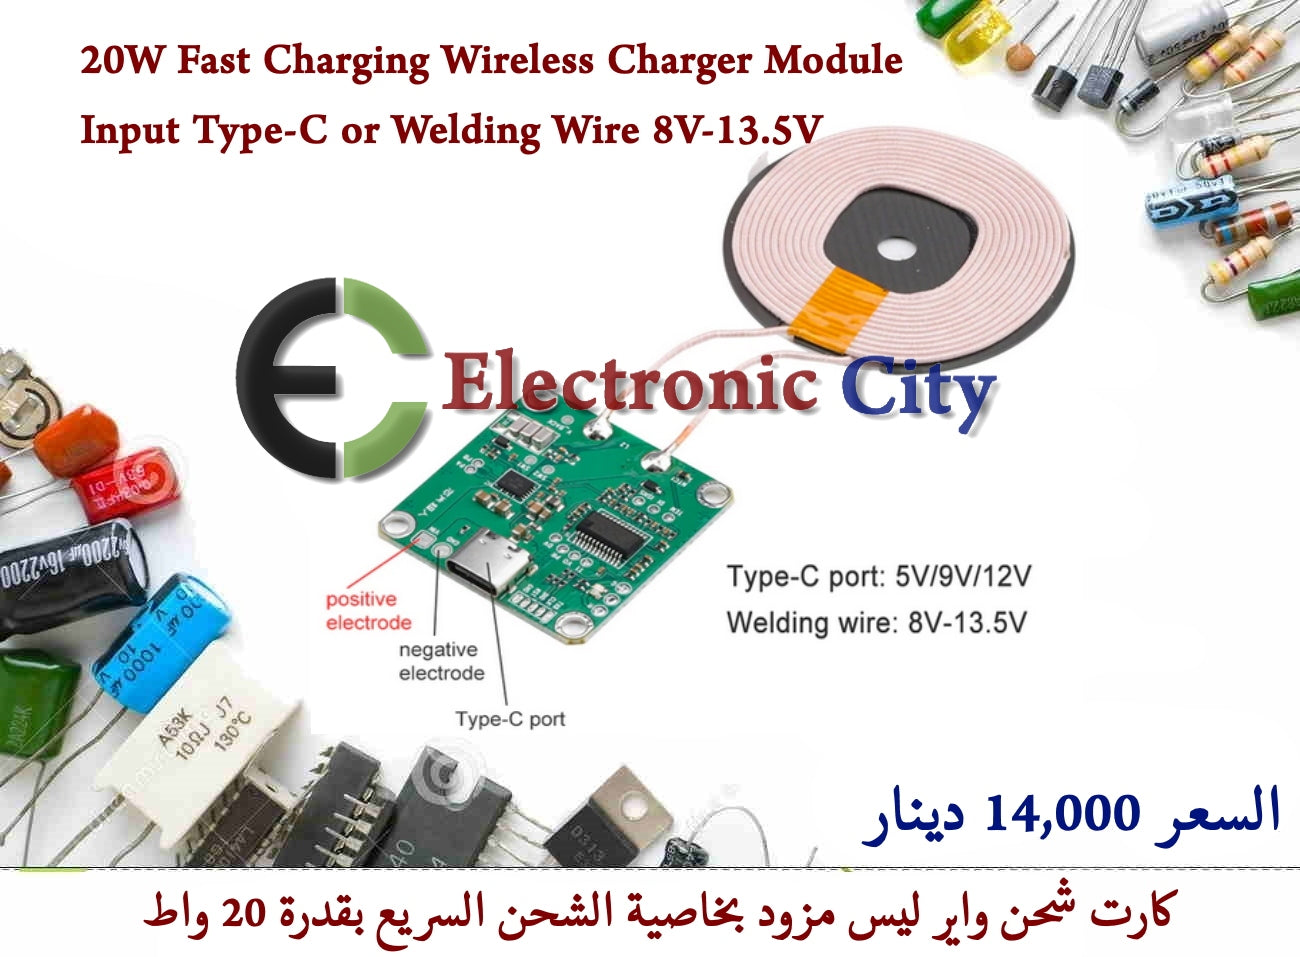 20W Fast Charging Wireless Charger Module Input Type-c or Welding Wire 8V-13.5V